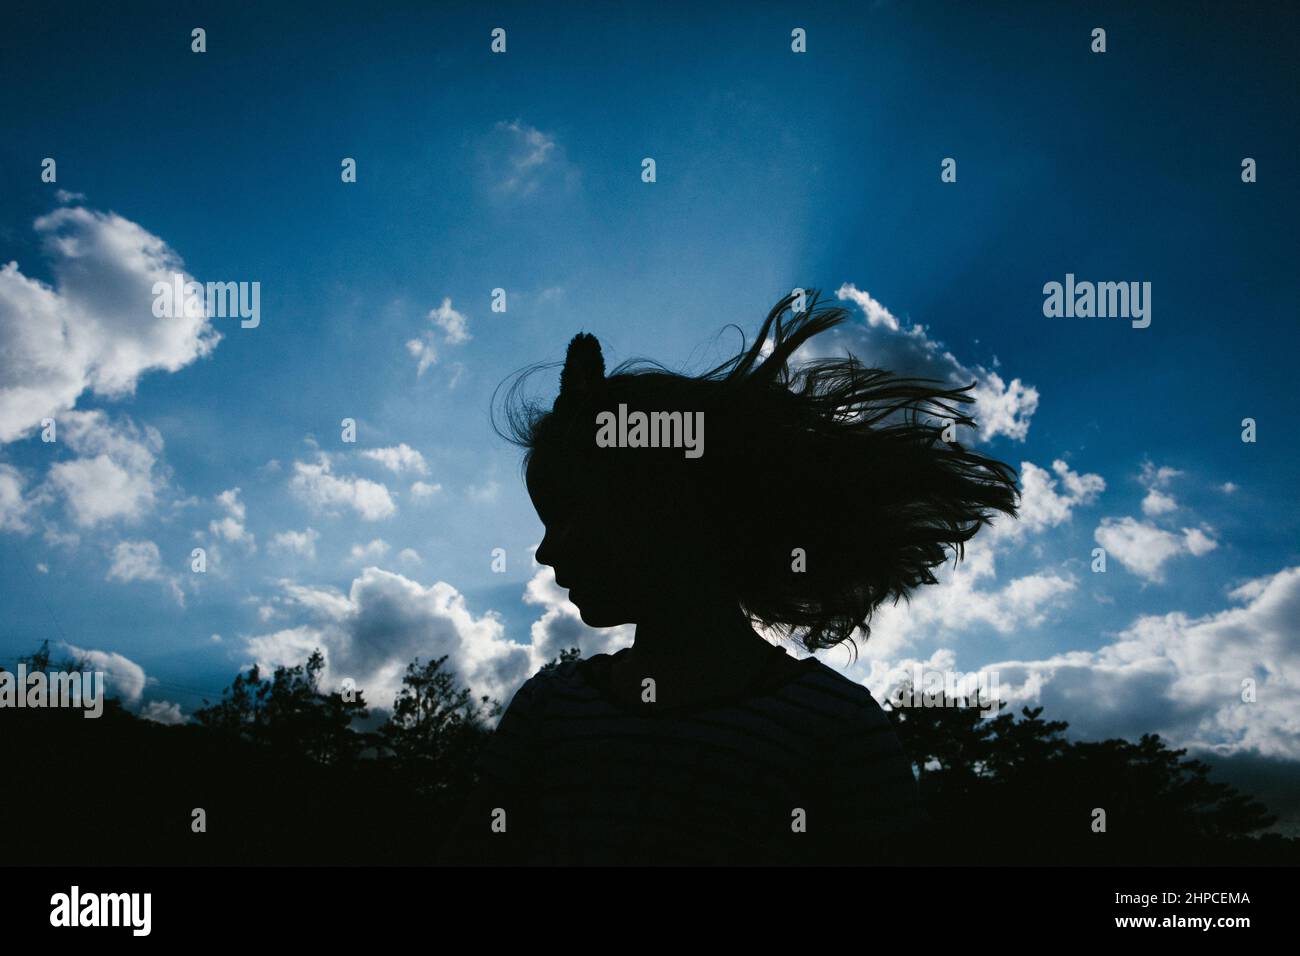 Long hair girl silhouette in front of sunny blue clouds sky Stock Photo